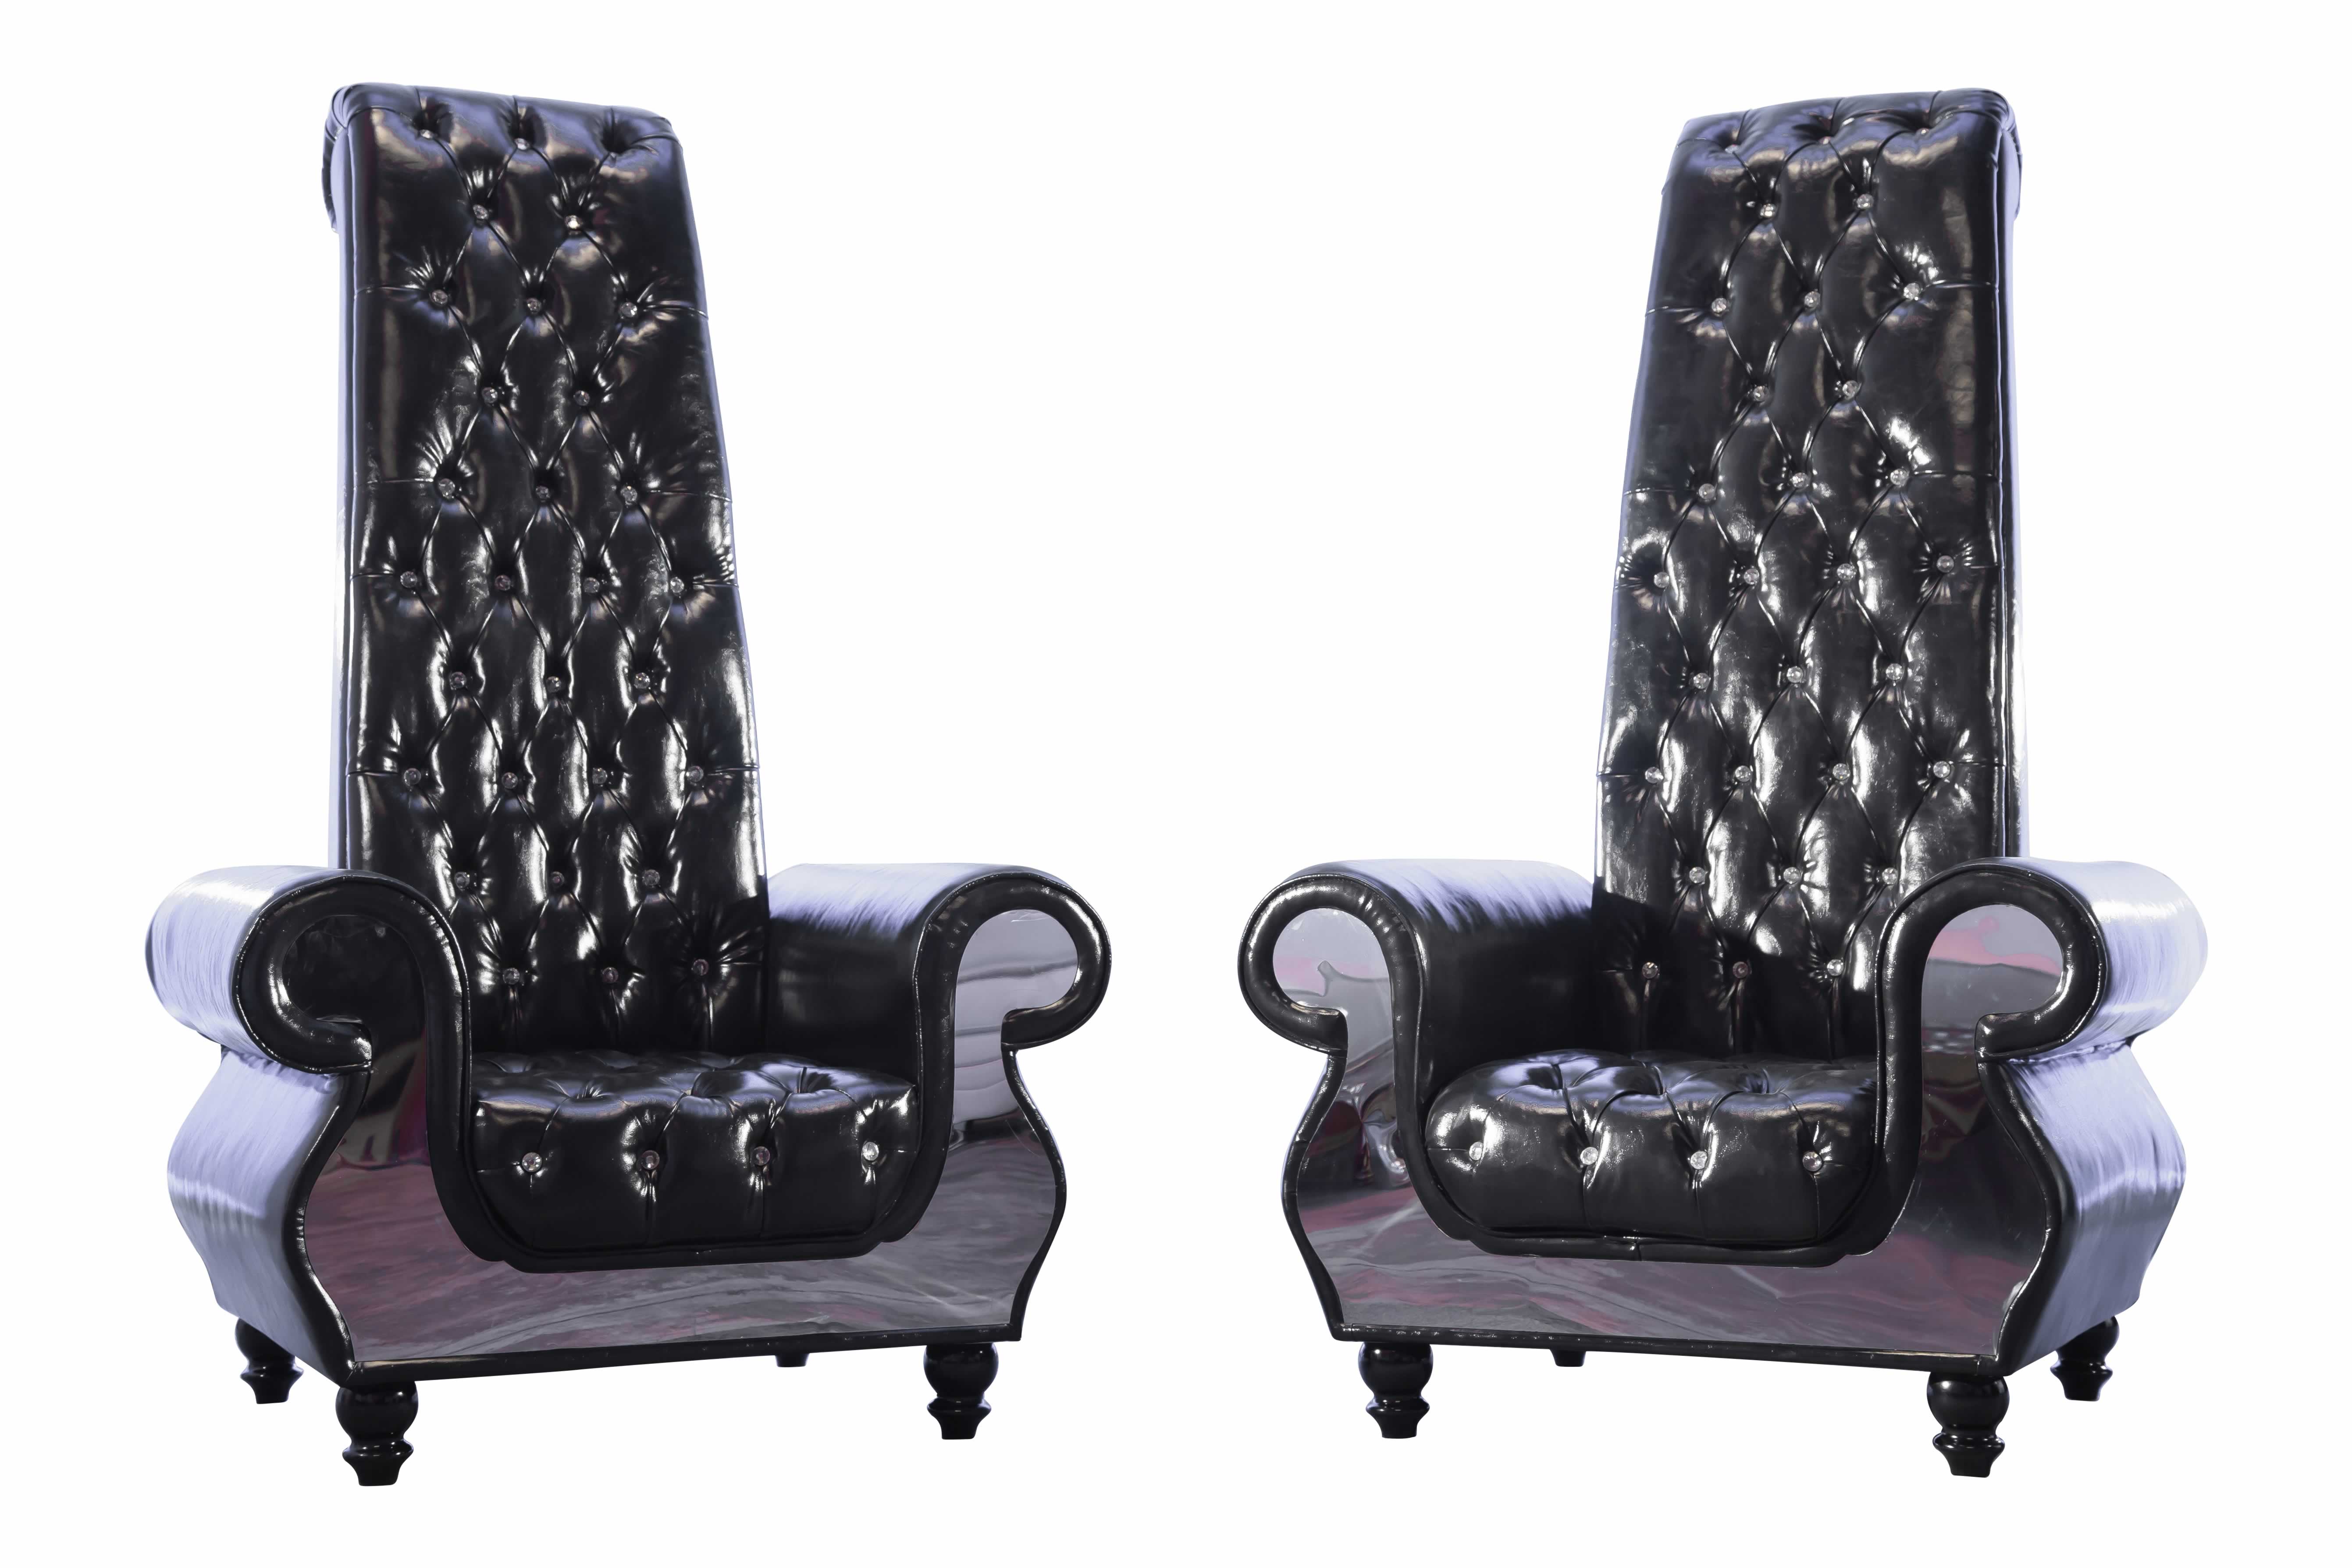 Studio 93 Throne Chair Set in Black POHP Events